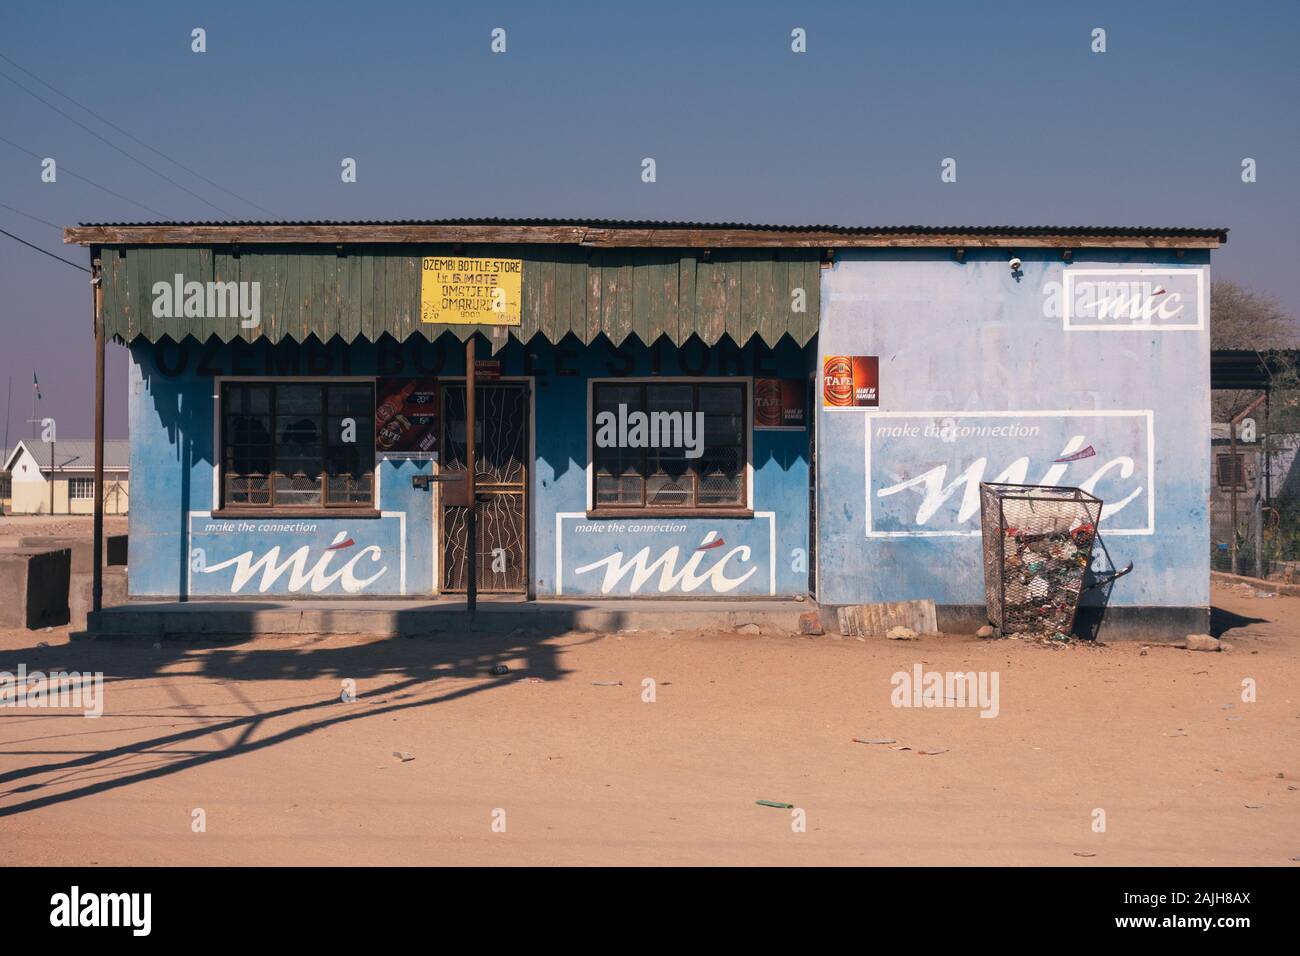 Omatjette, Erongo Region, Namibia - July 24 2019: Bottle Store, a Liquor Store selling Beer in a Local Community in Omatjette, Namibia, Africa. Stock Photo